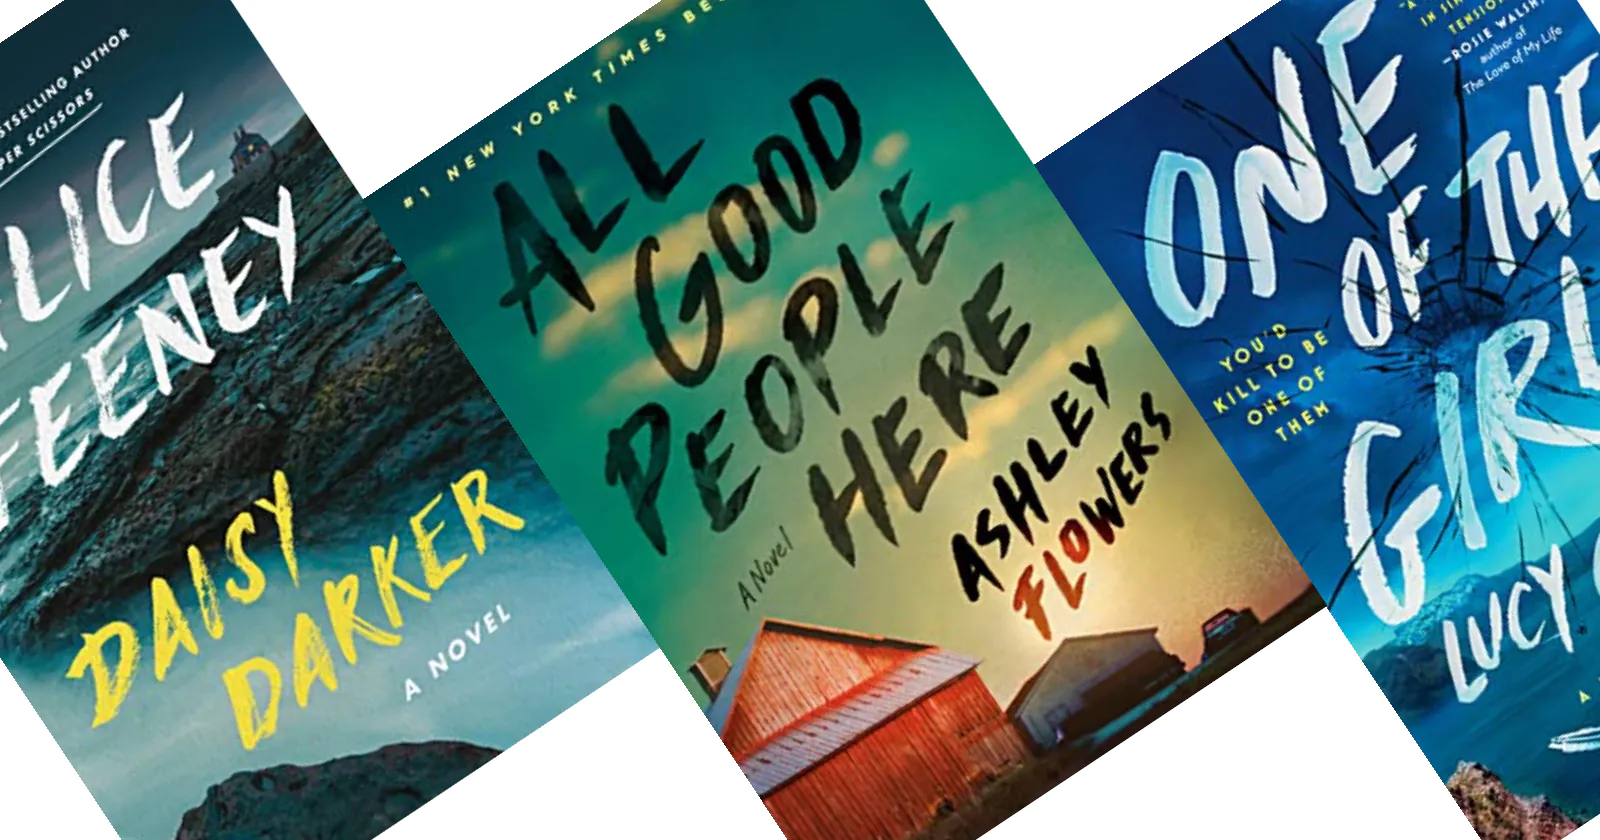 New Mystery & Thriller Books Coming This October